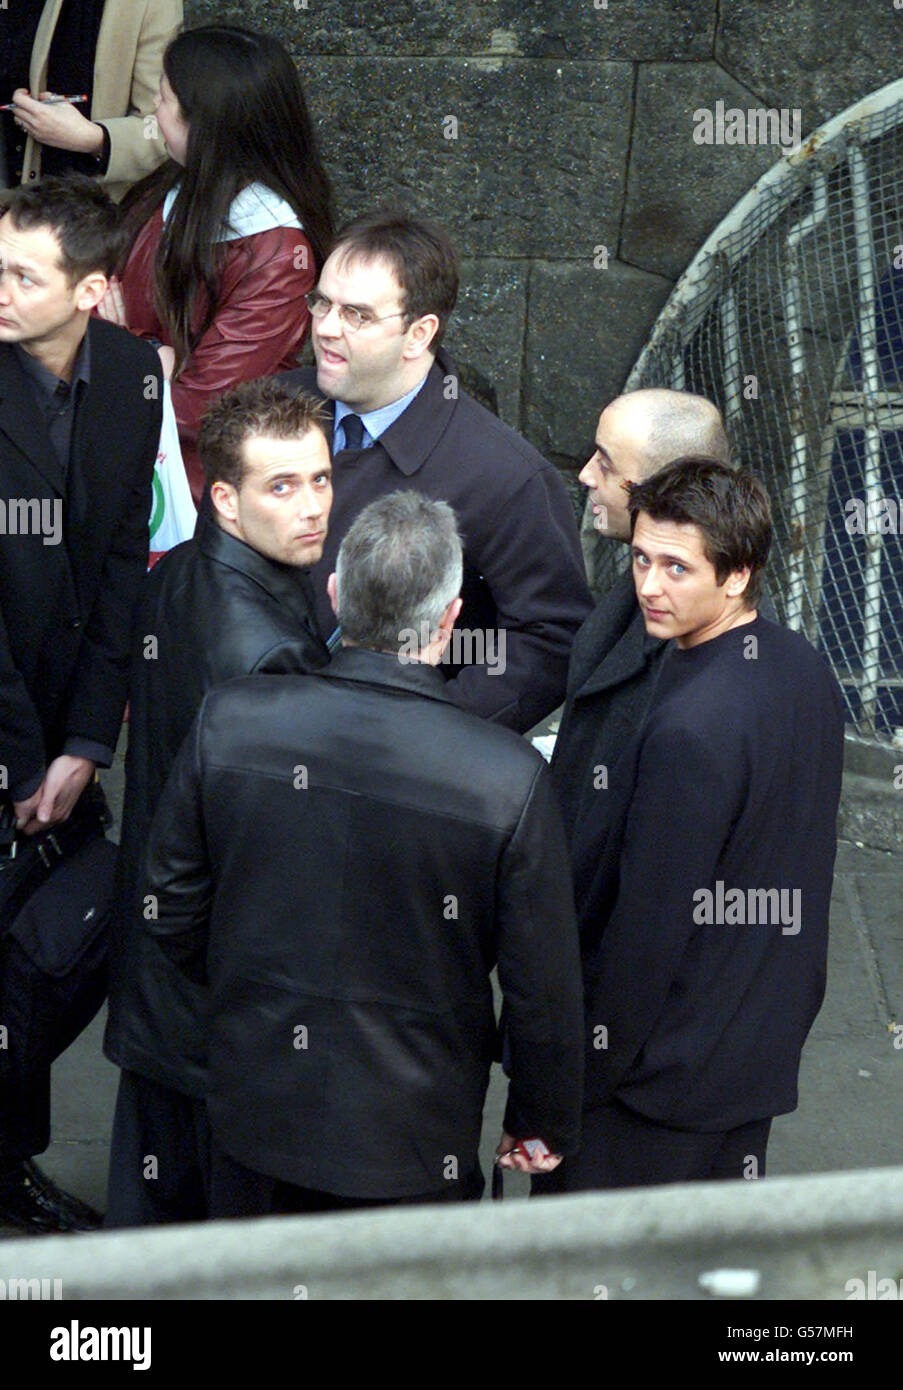 Jason Brown (L) and Ritchie Neville (R), two members of boy band 5ive, outside Dublin's District Court after they were remanded on bail when they appeared in court charged in connection with a brawl in a bar. * Brown, 23, and Neville, 21, are both accused of having been drunk and disorderly in the Palace Bar in Fleet Street, Dublin. Brown is also charged with assault. Both men were bailed to appear at Dublin's Richmond Court. Stock Photo